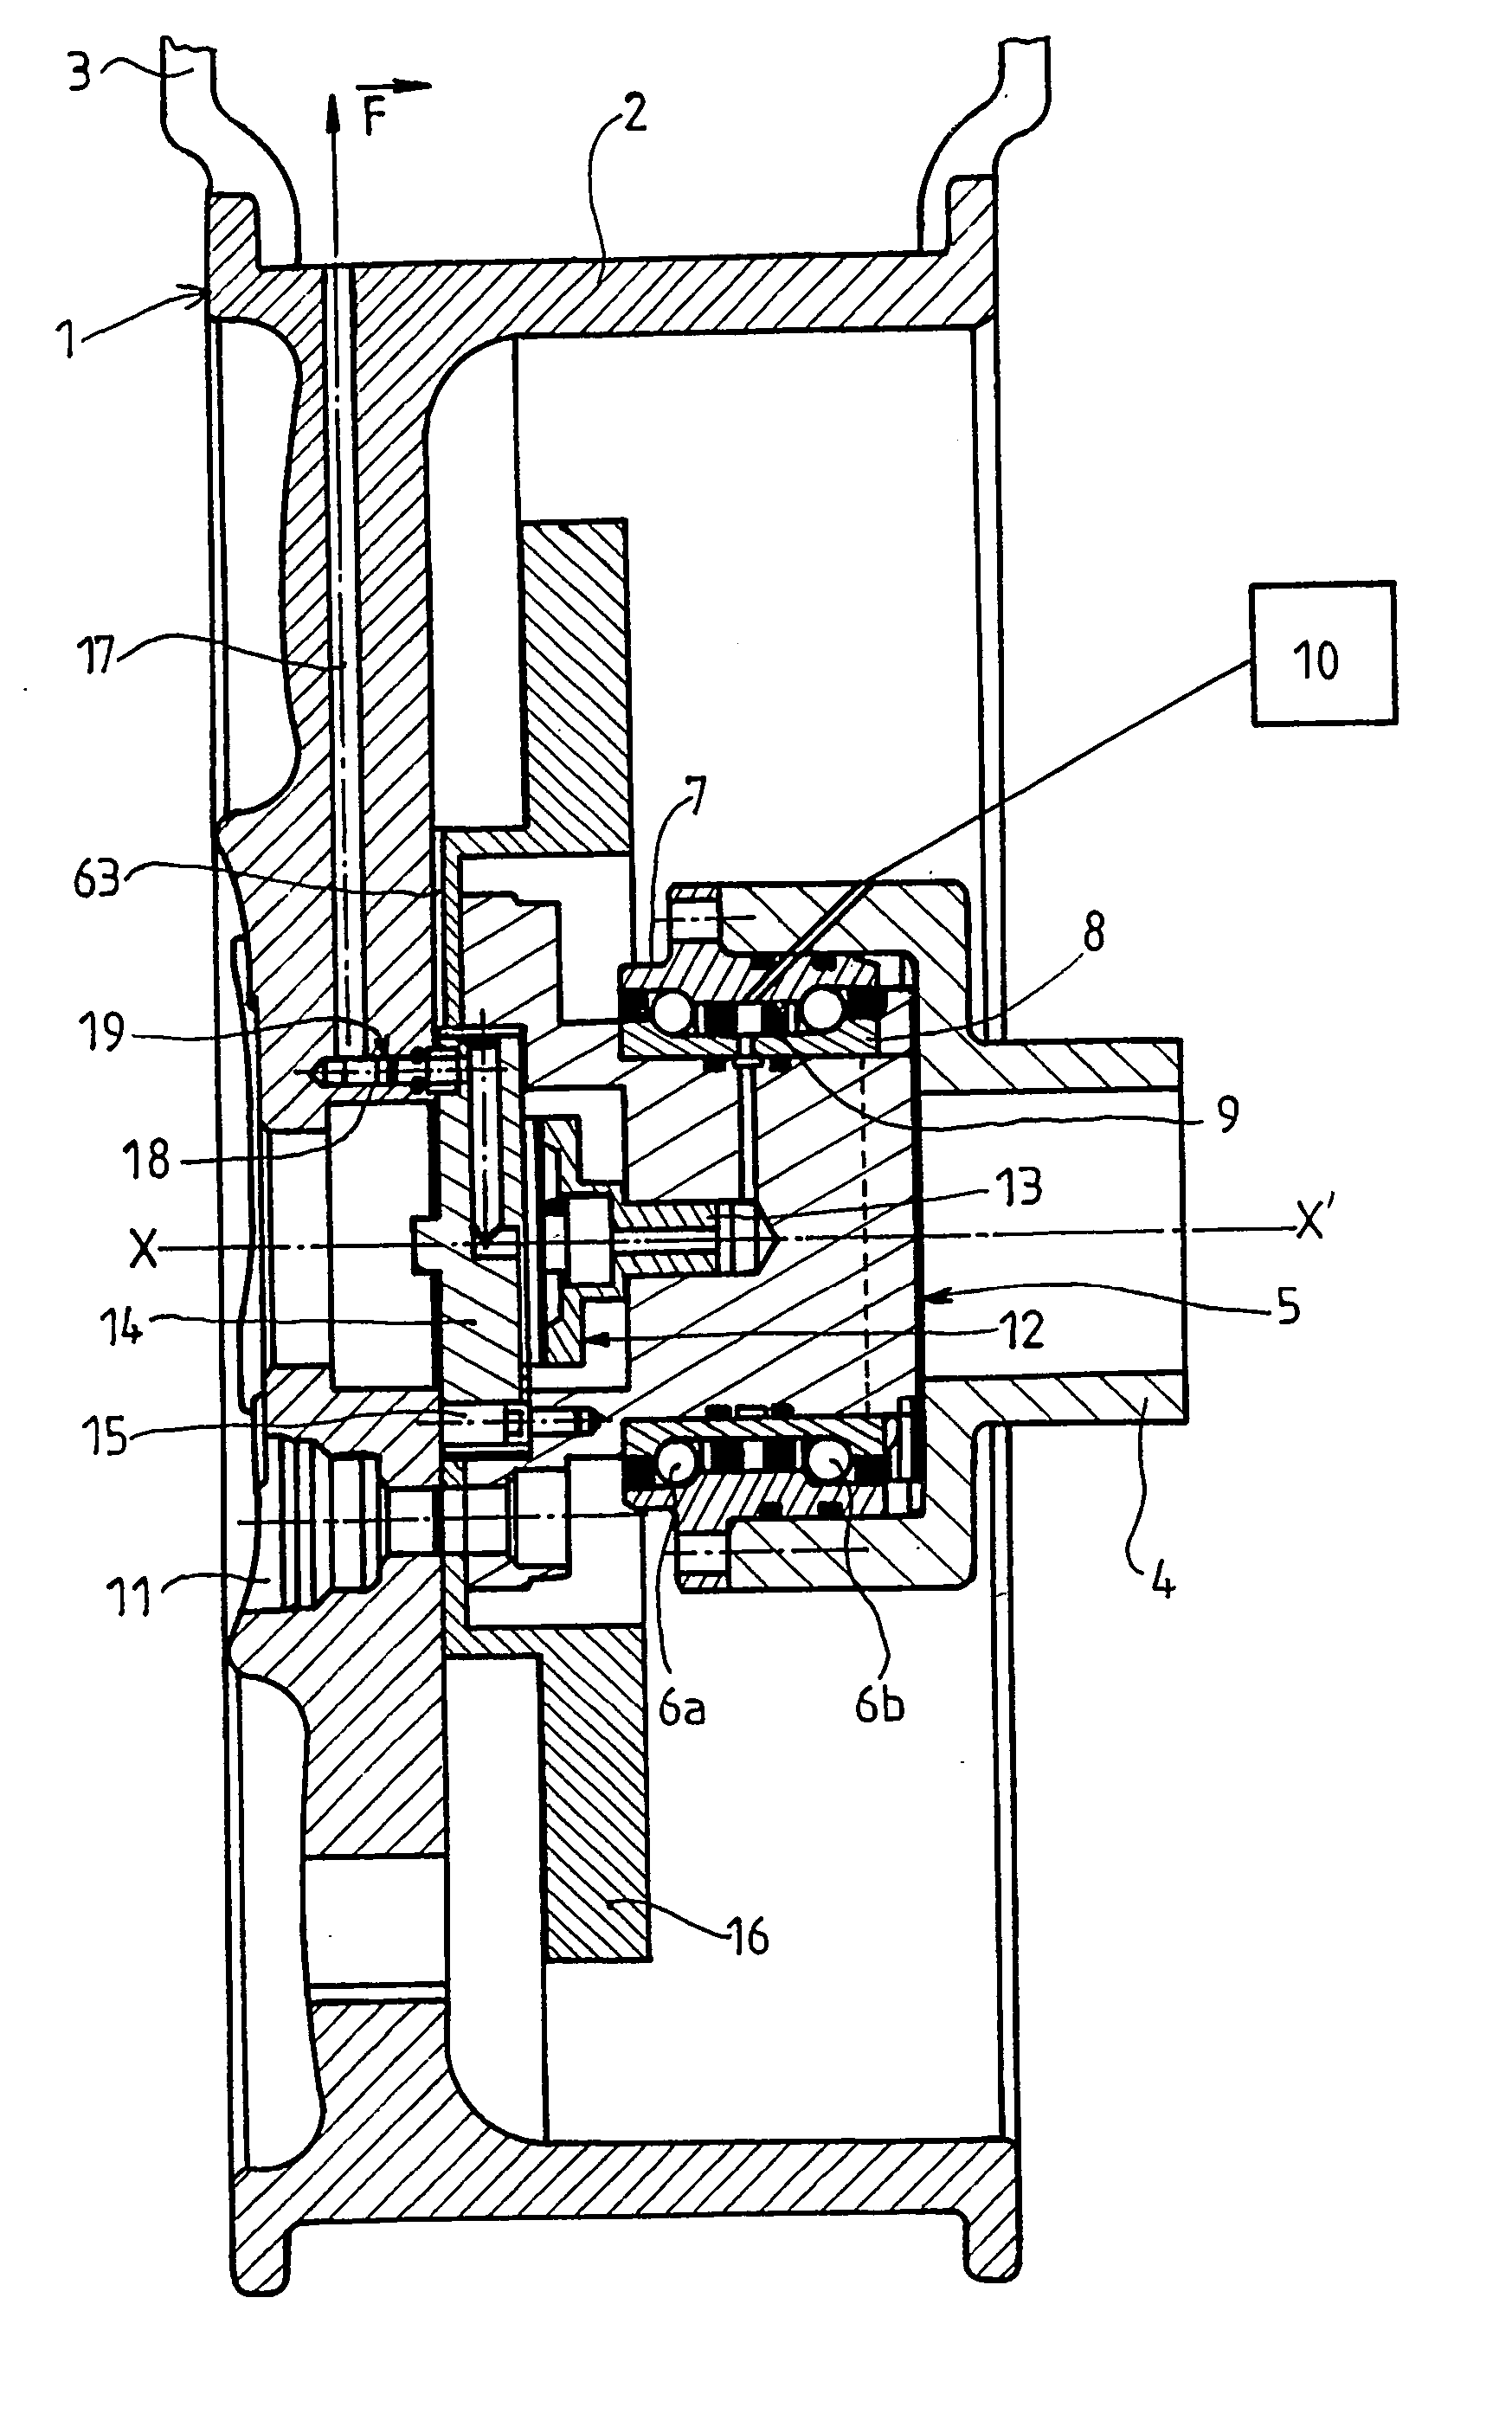 Tyre self-sealing device for the wheel of a vehicle